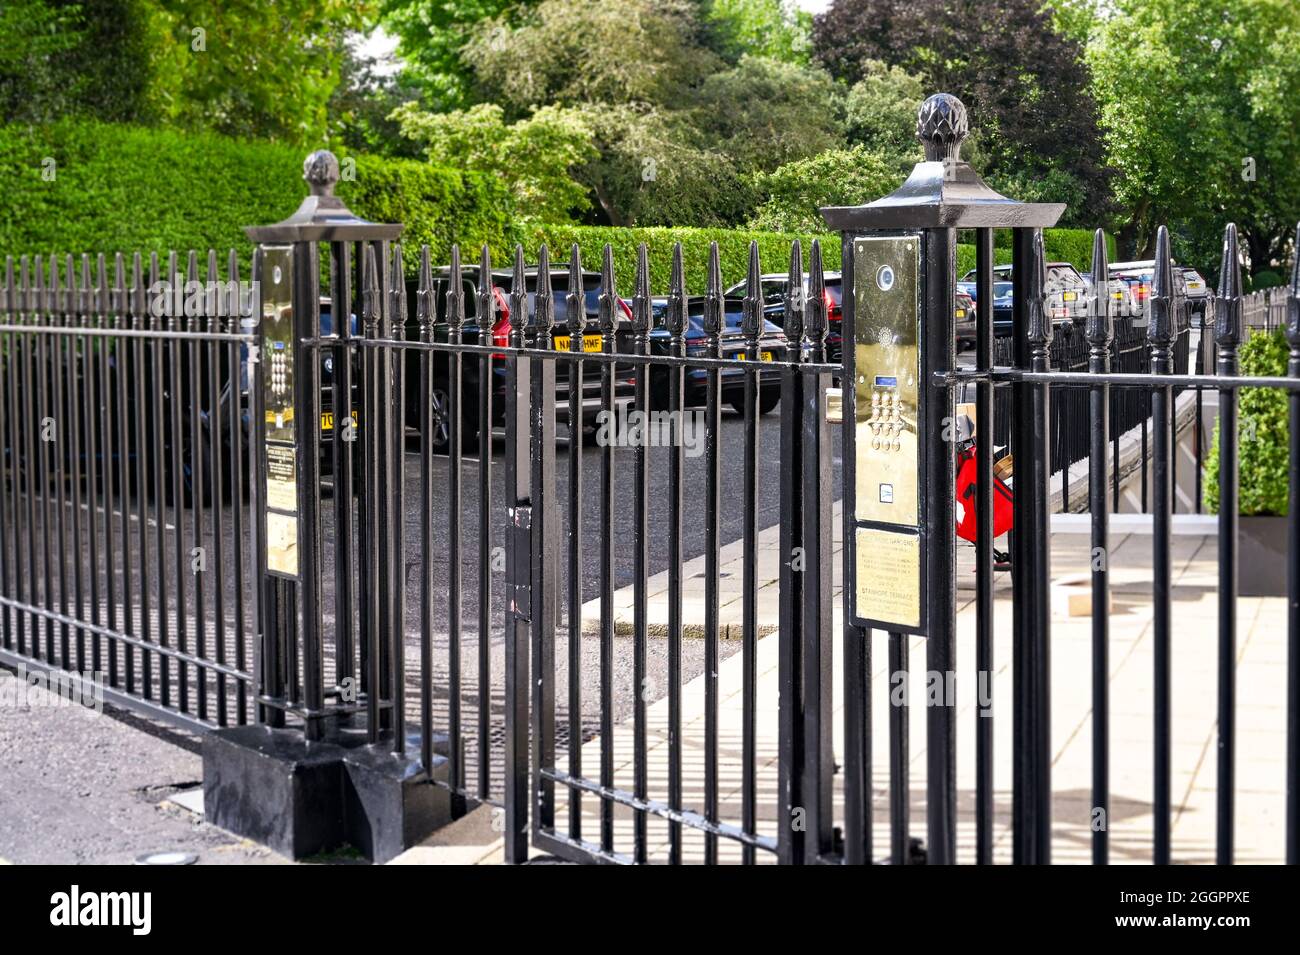 London, England - August 2021: Pedestrian gate with push button security access to a street of town houses near Hyde Park. Stock Photo